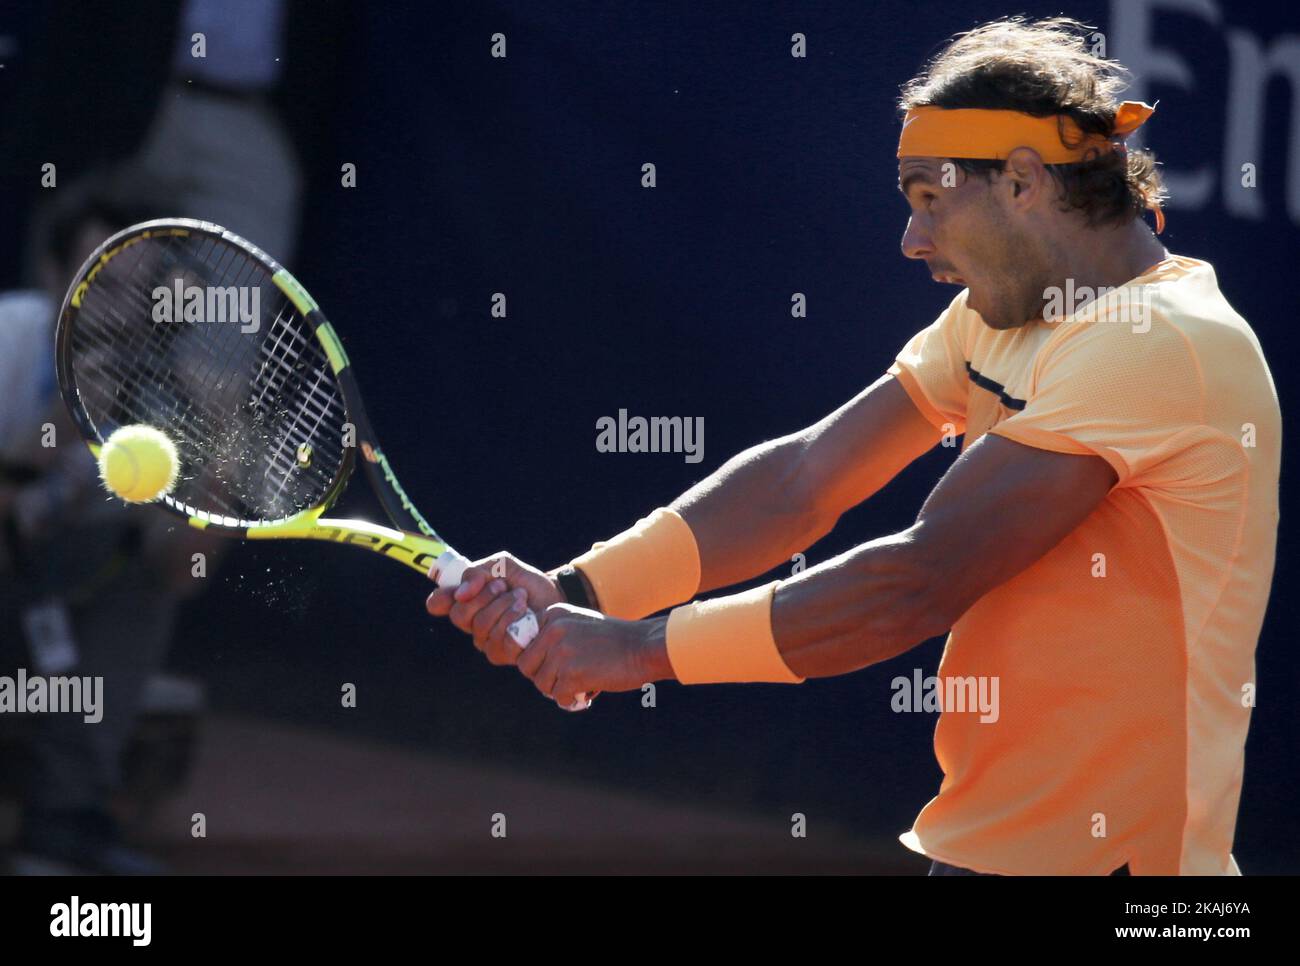 Rafa Nadal during que match against Kei Nishikori, corresponding to the final of the Open Banc Sabadell, 64 Trophy Conde de Godo, played on the RCT Barcelona1899. Stock Photo